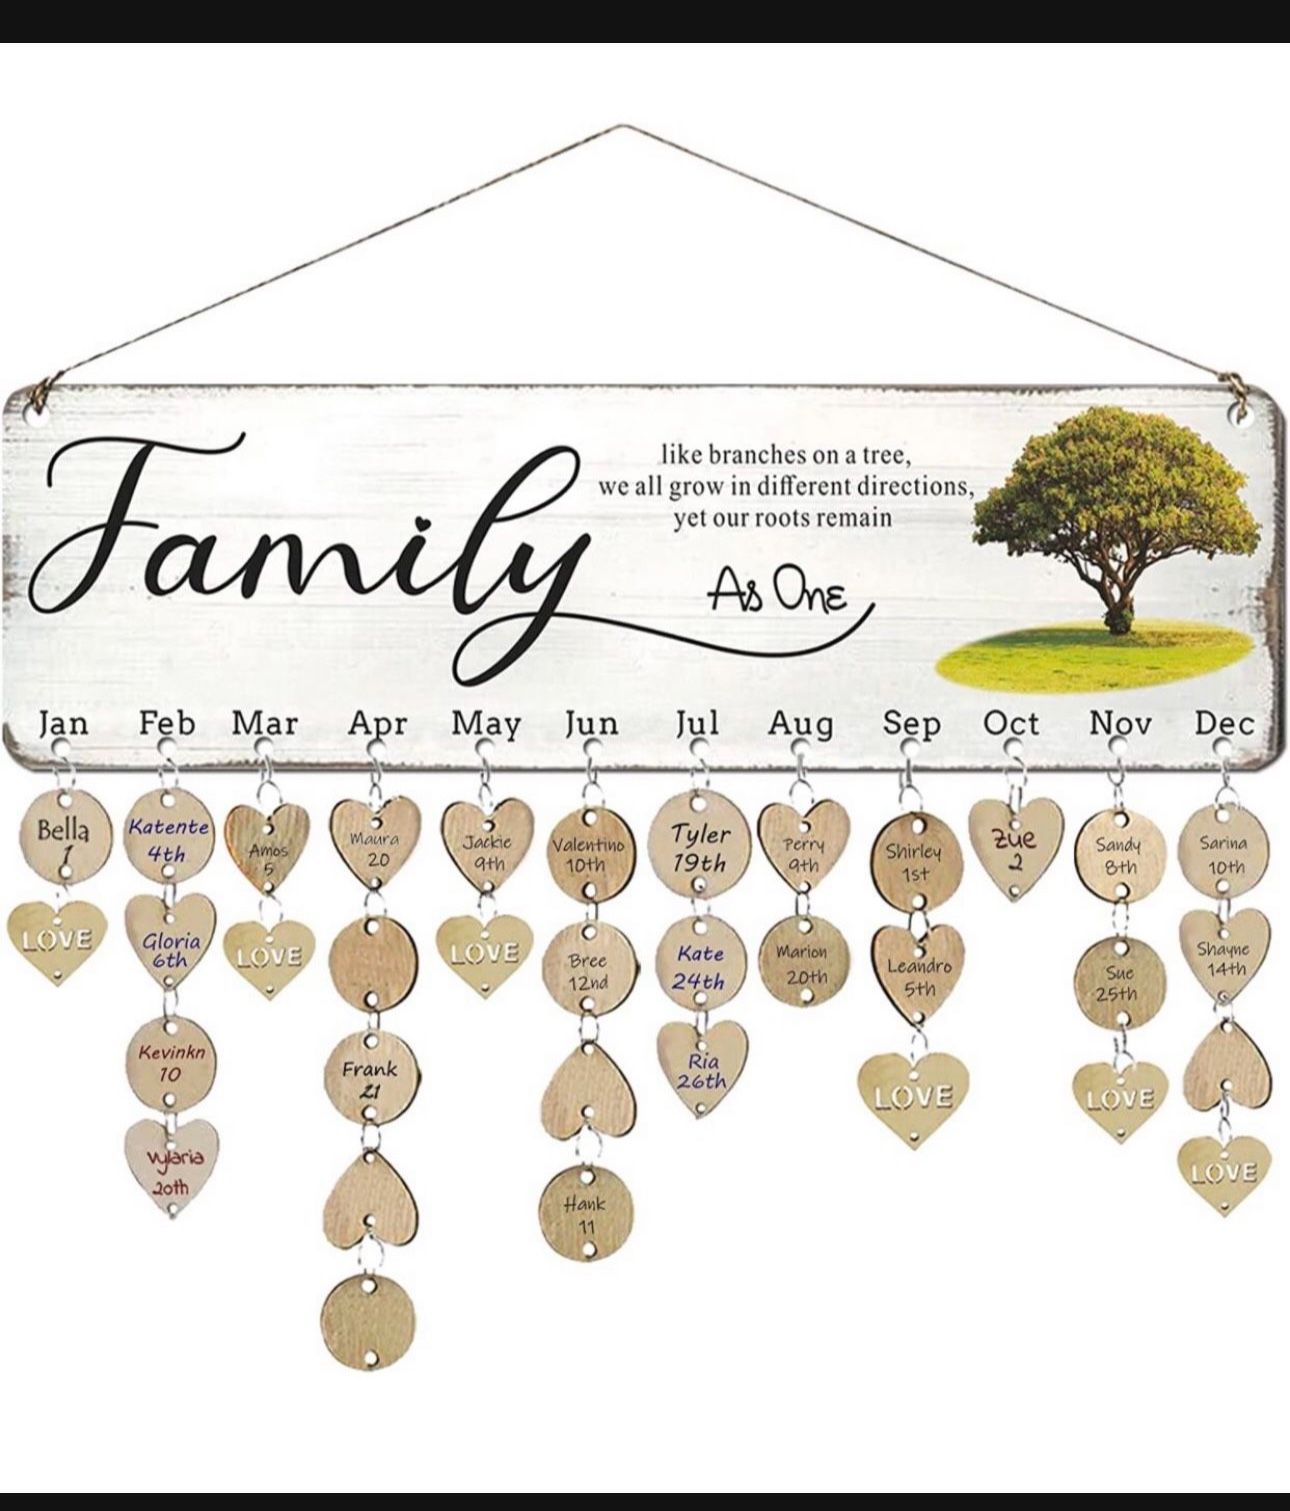 Gifts for Grandma - Wooden Family Birthday Reminder Tracker Calendar Board, Write the Name Date on Tags to Track Birthday, Best Birthday Christmas Pre